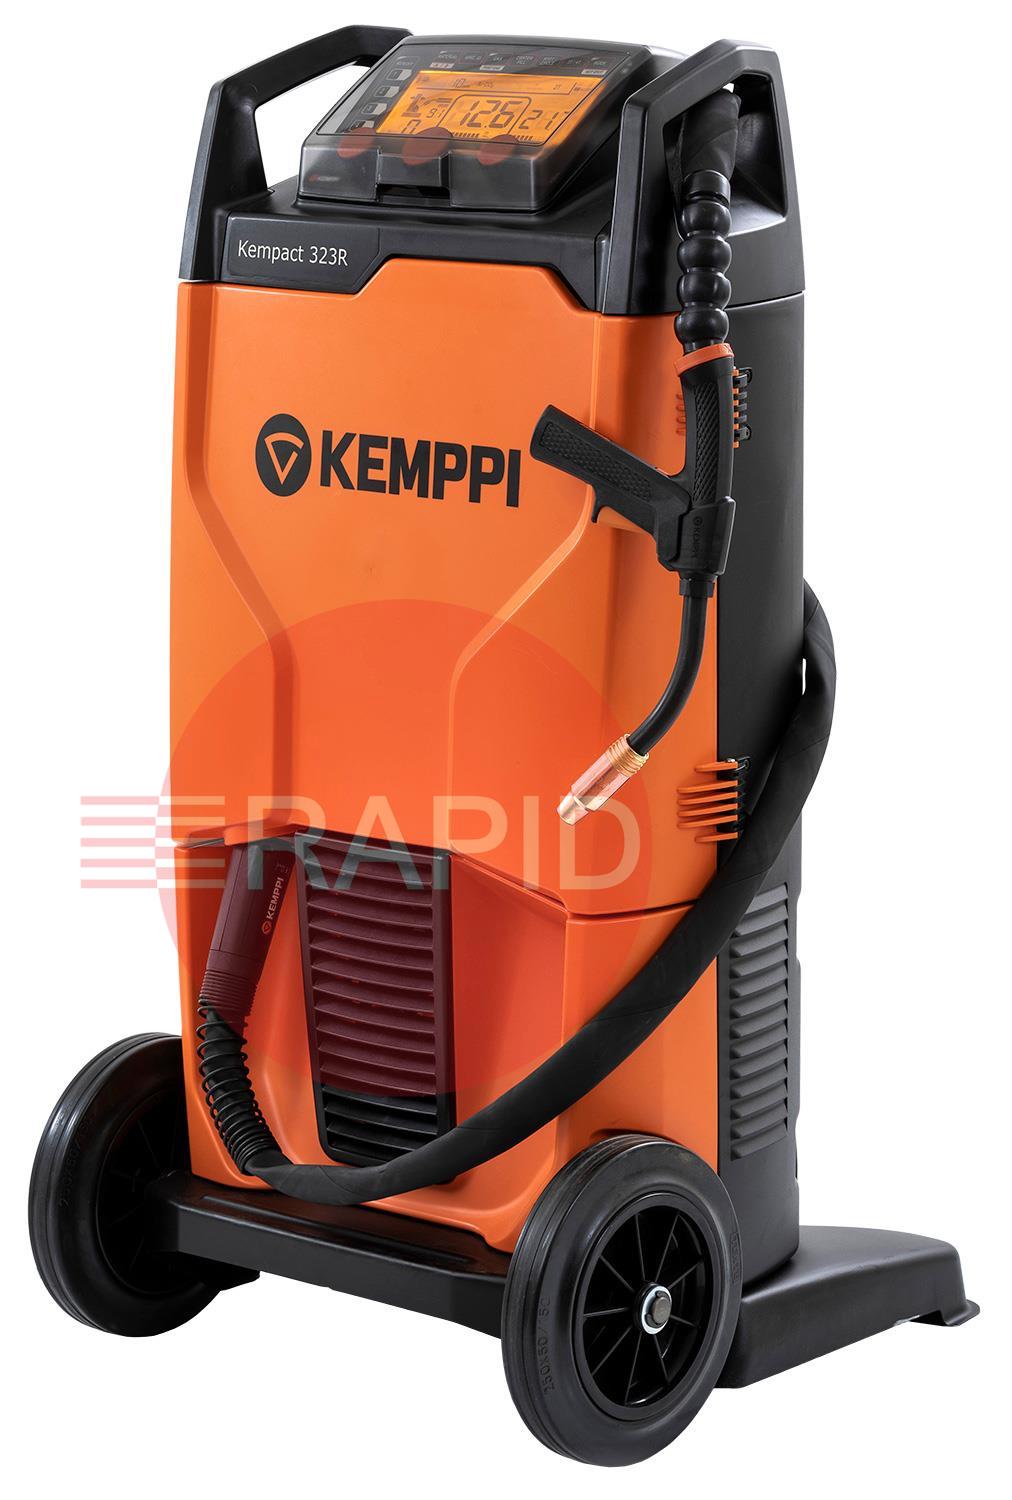 P2230GXE  Kemppi Kempact RA 323R, 320A 3 Phase 400v Mig Welder, with Flexlite GXe 305G 5.0m Torch